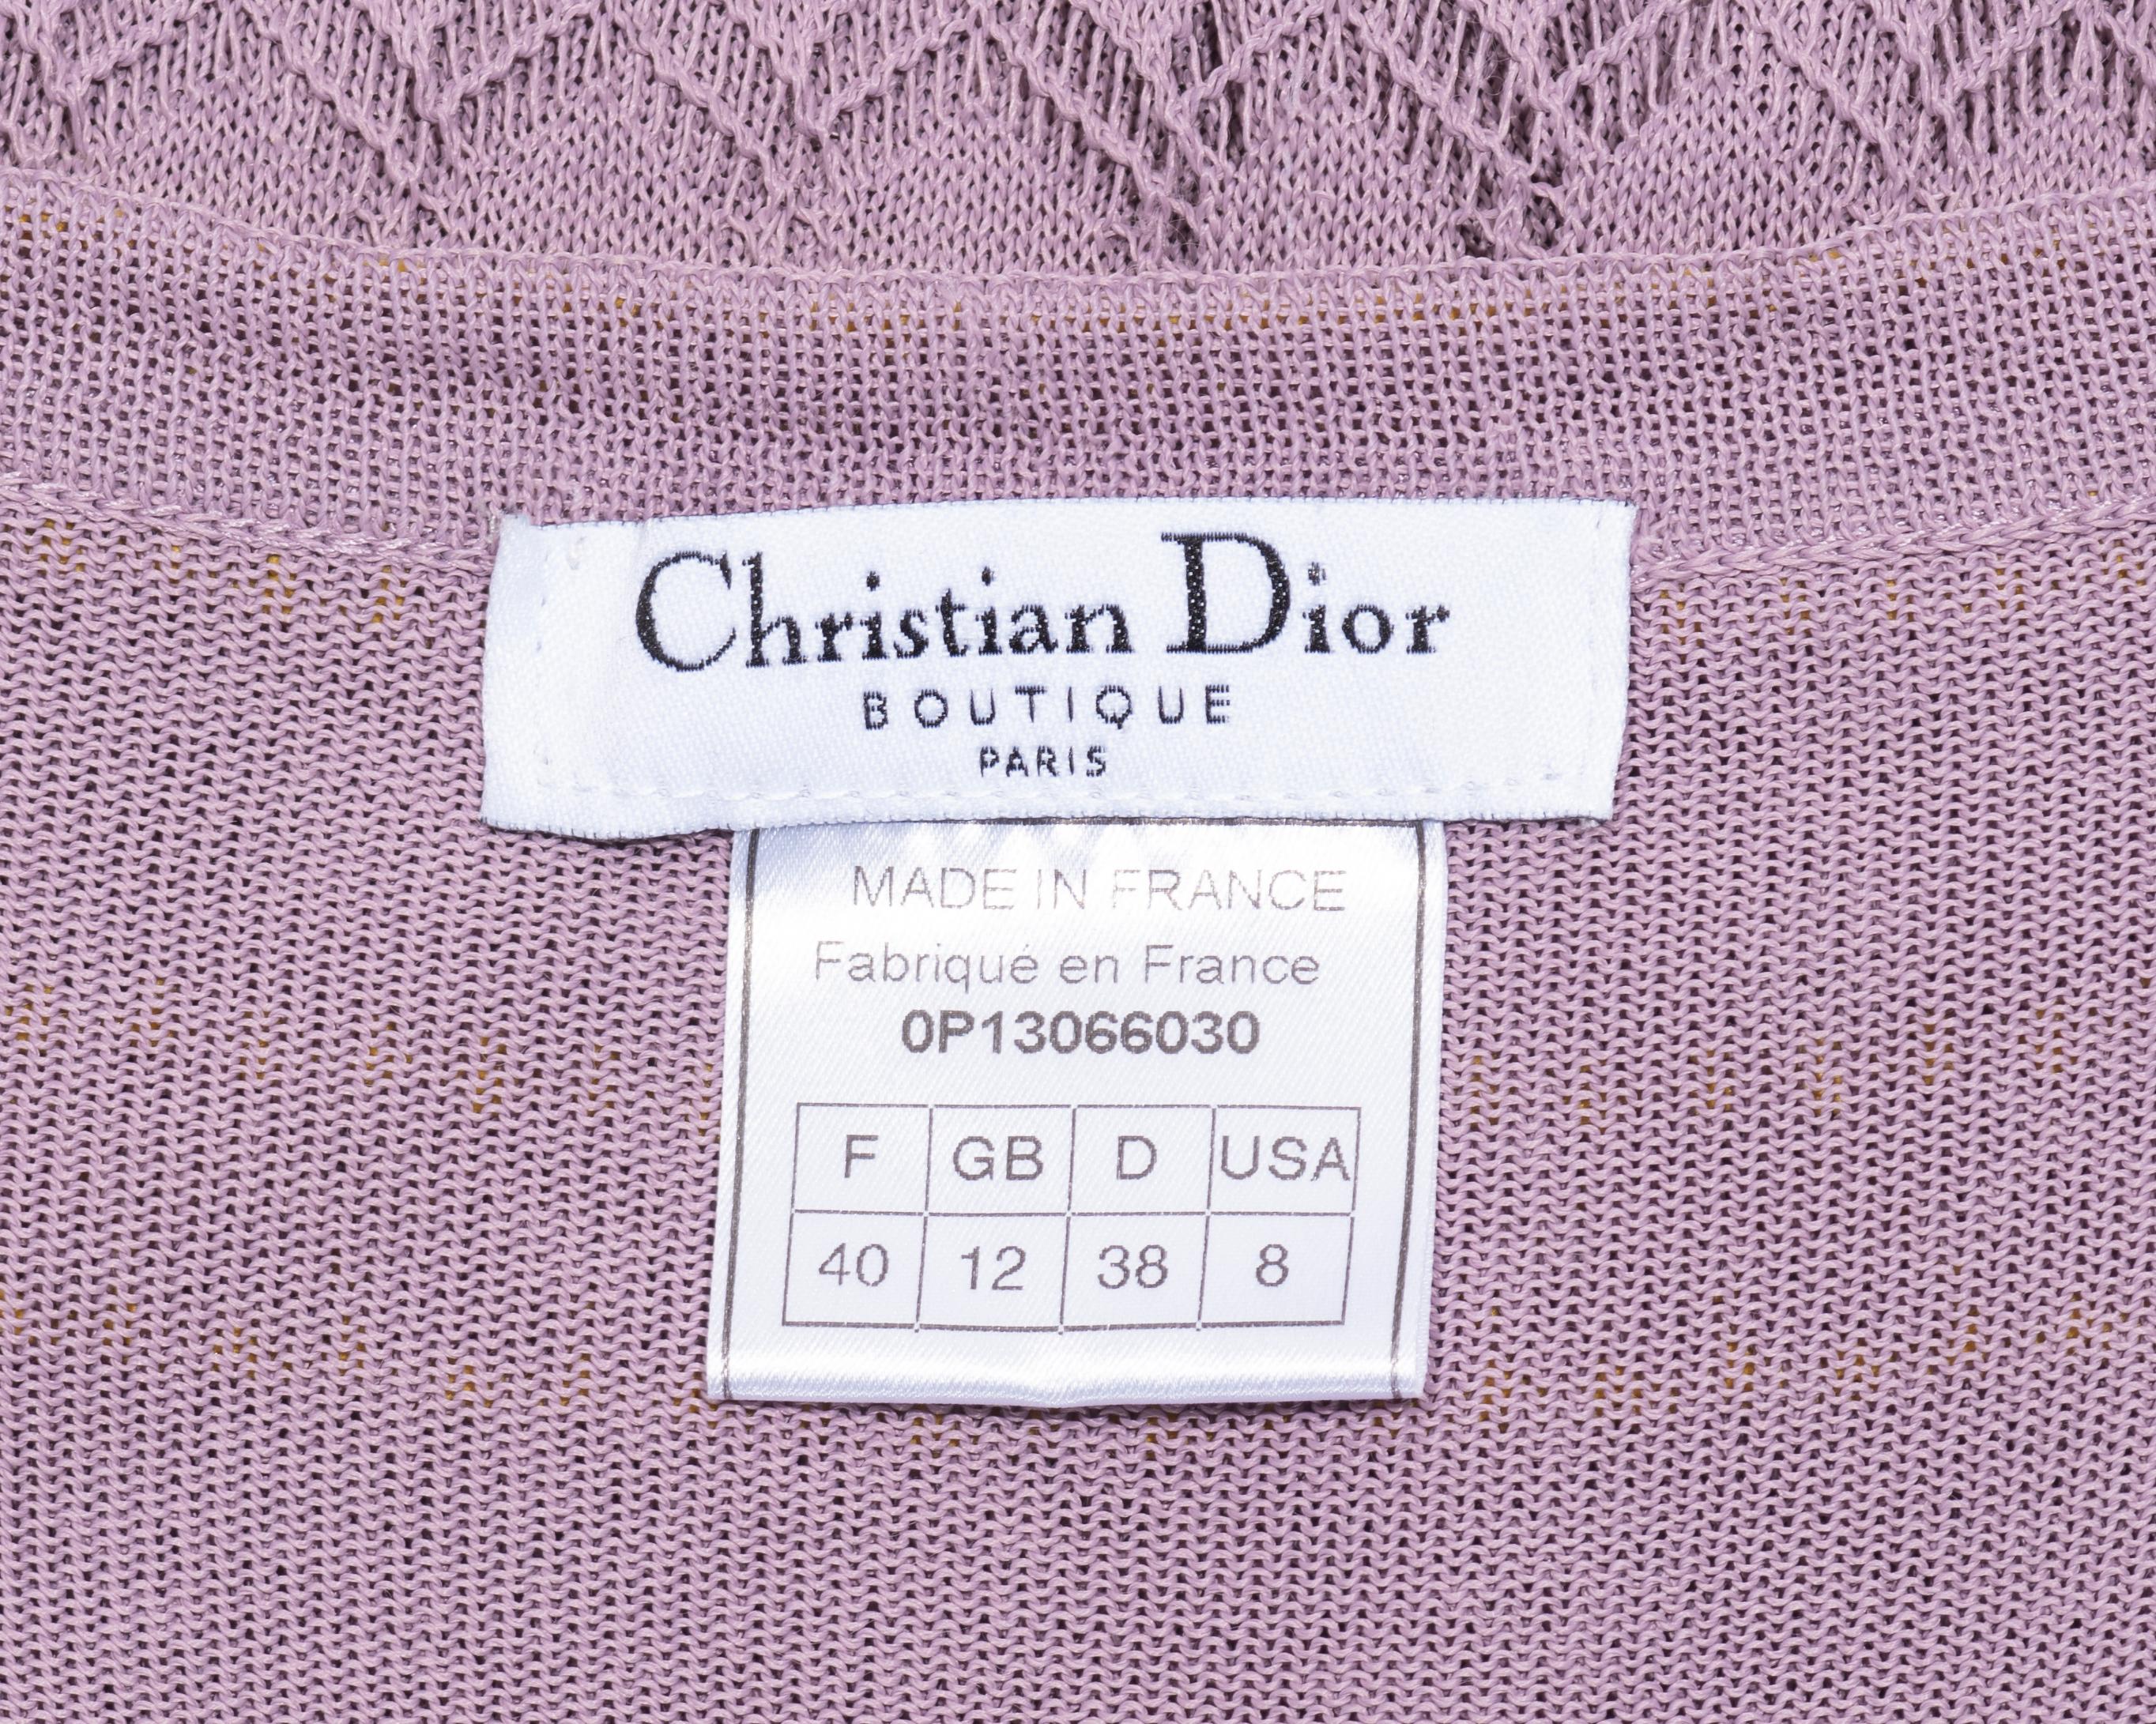 Christian Dior by John Galliano lavender crochet lace maxi dress, ss 2000 For Sale 5